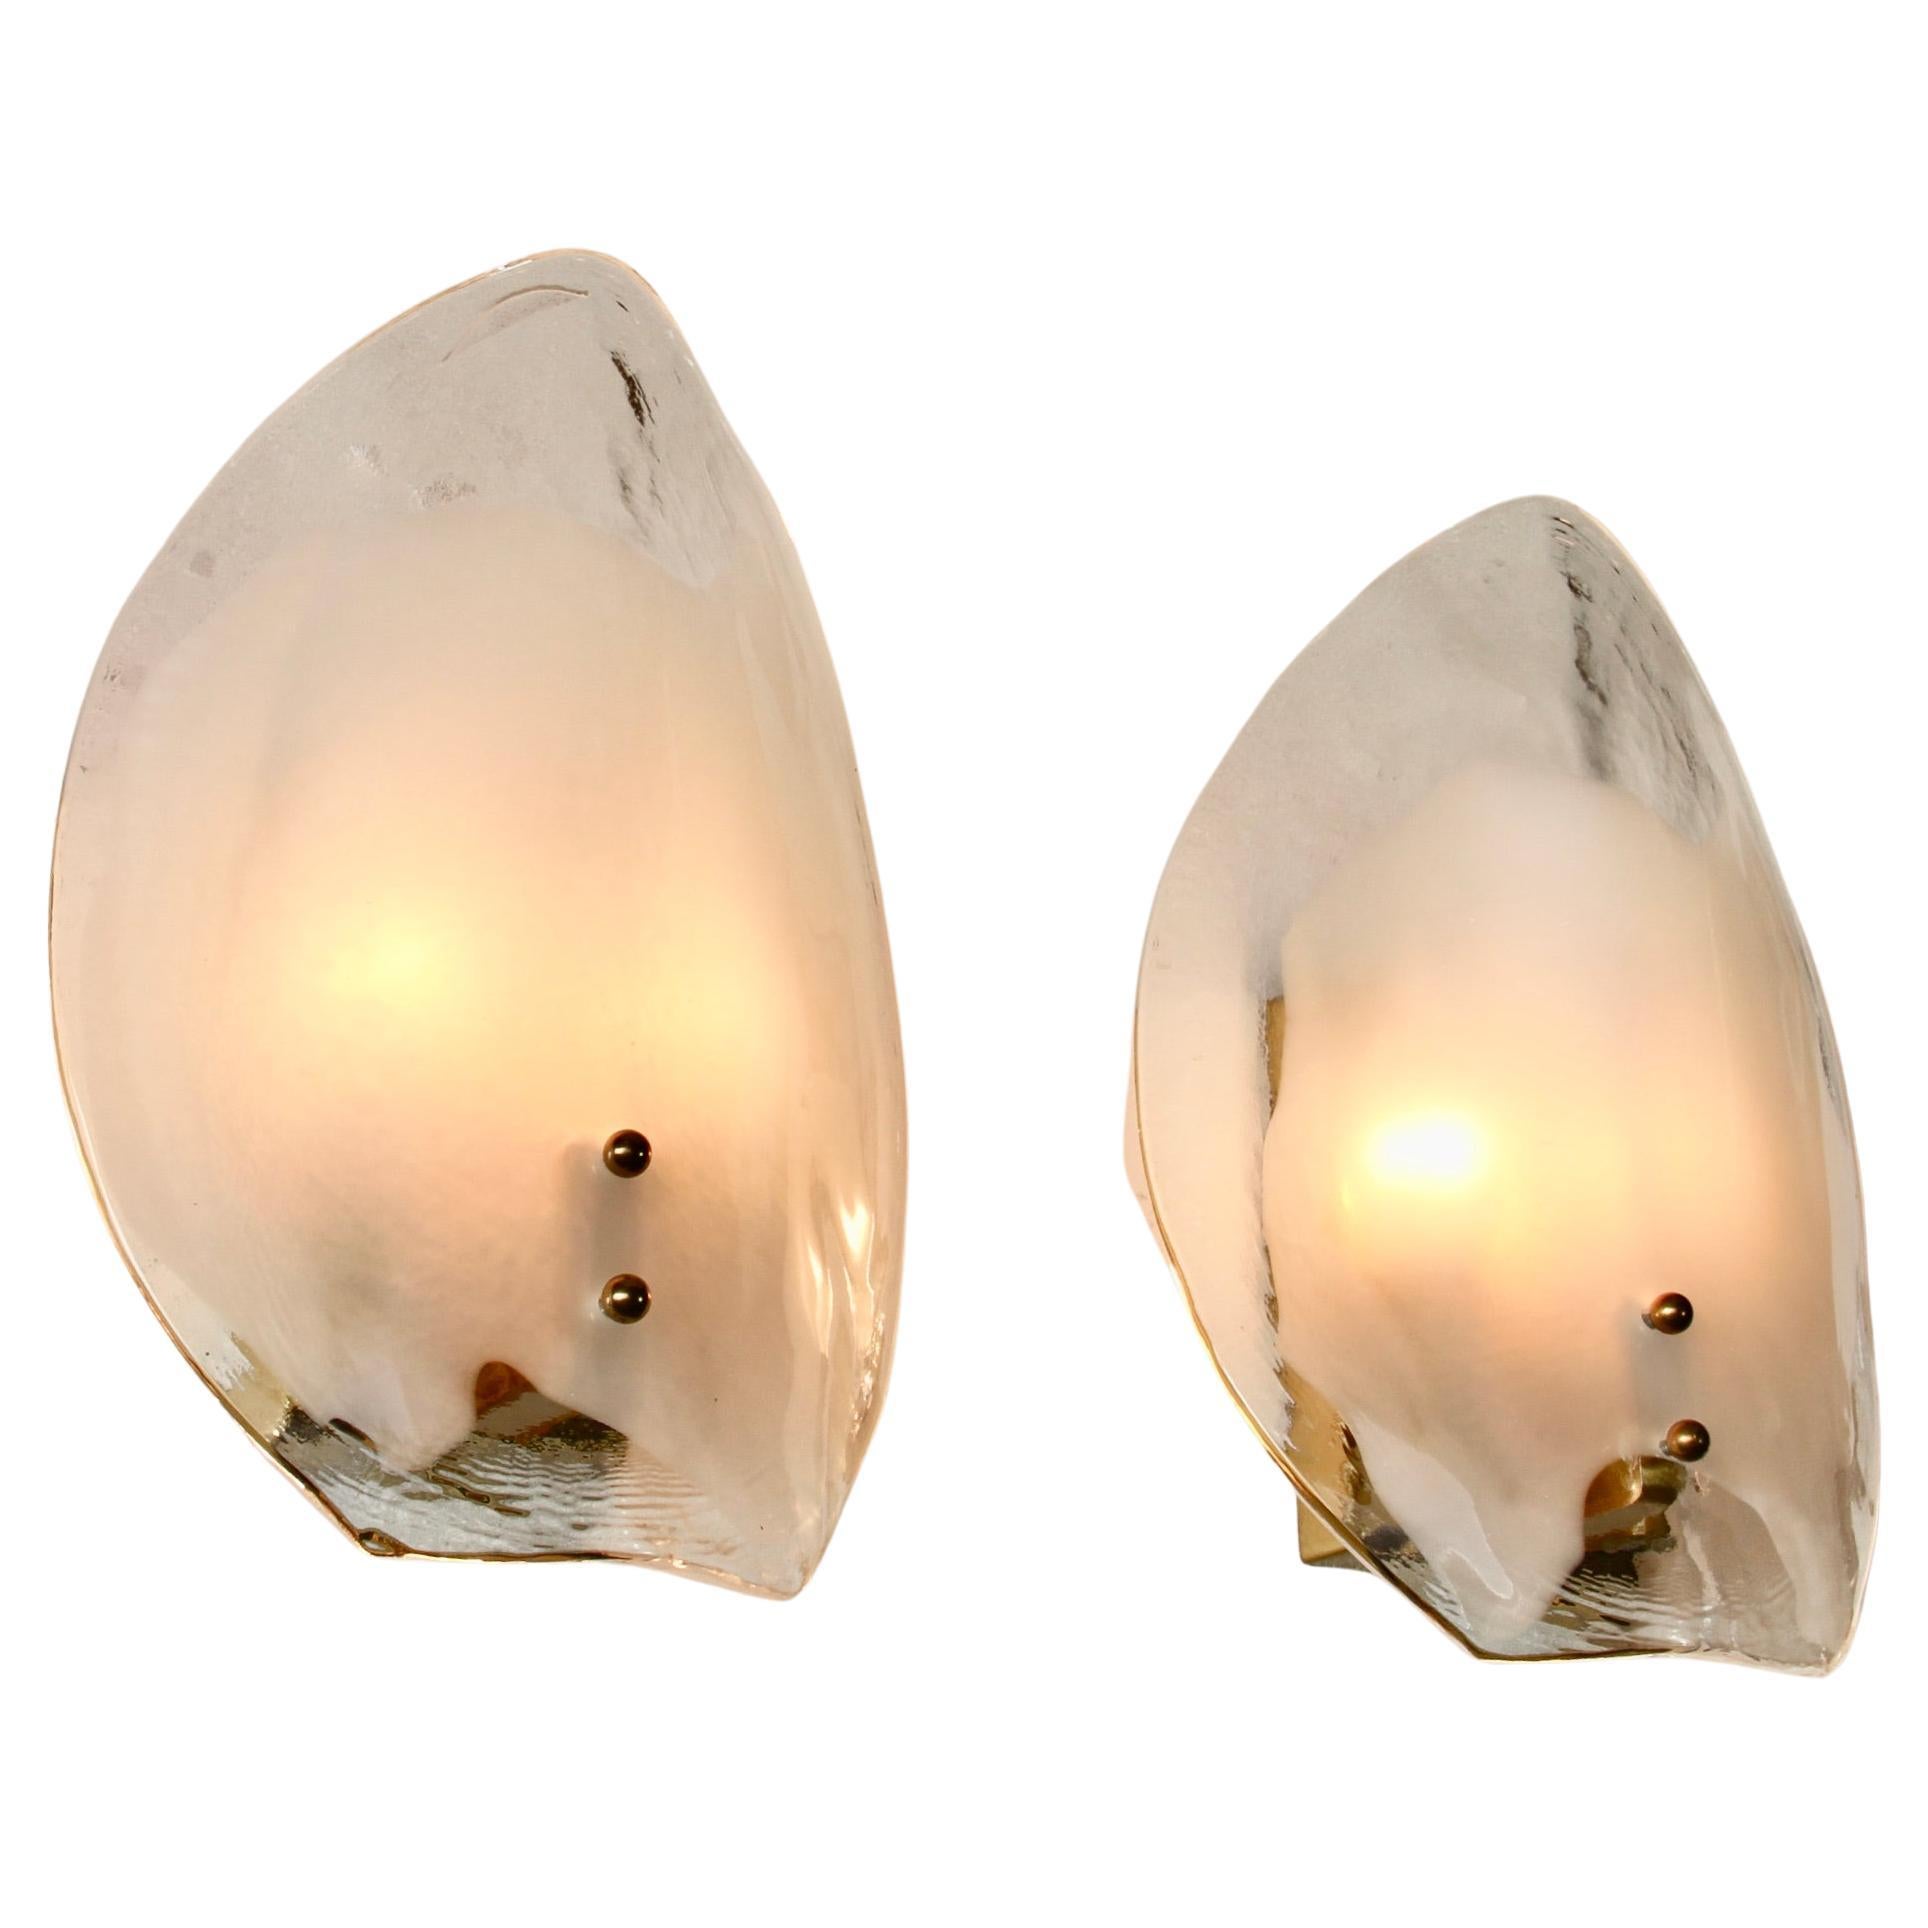 Vintage Mid-Century Modern rare pair of organic brass, white and clear Murano glass double socketed wall lamps, lights or sconces by Austrian lighting manufacturer Kalmar, circa 1970s. Featuring two folded, curved 'flower petal' shaped glass